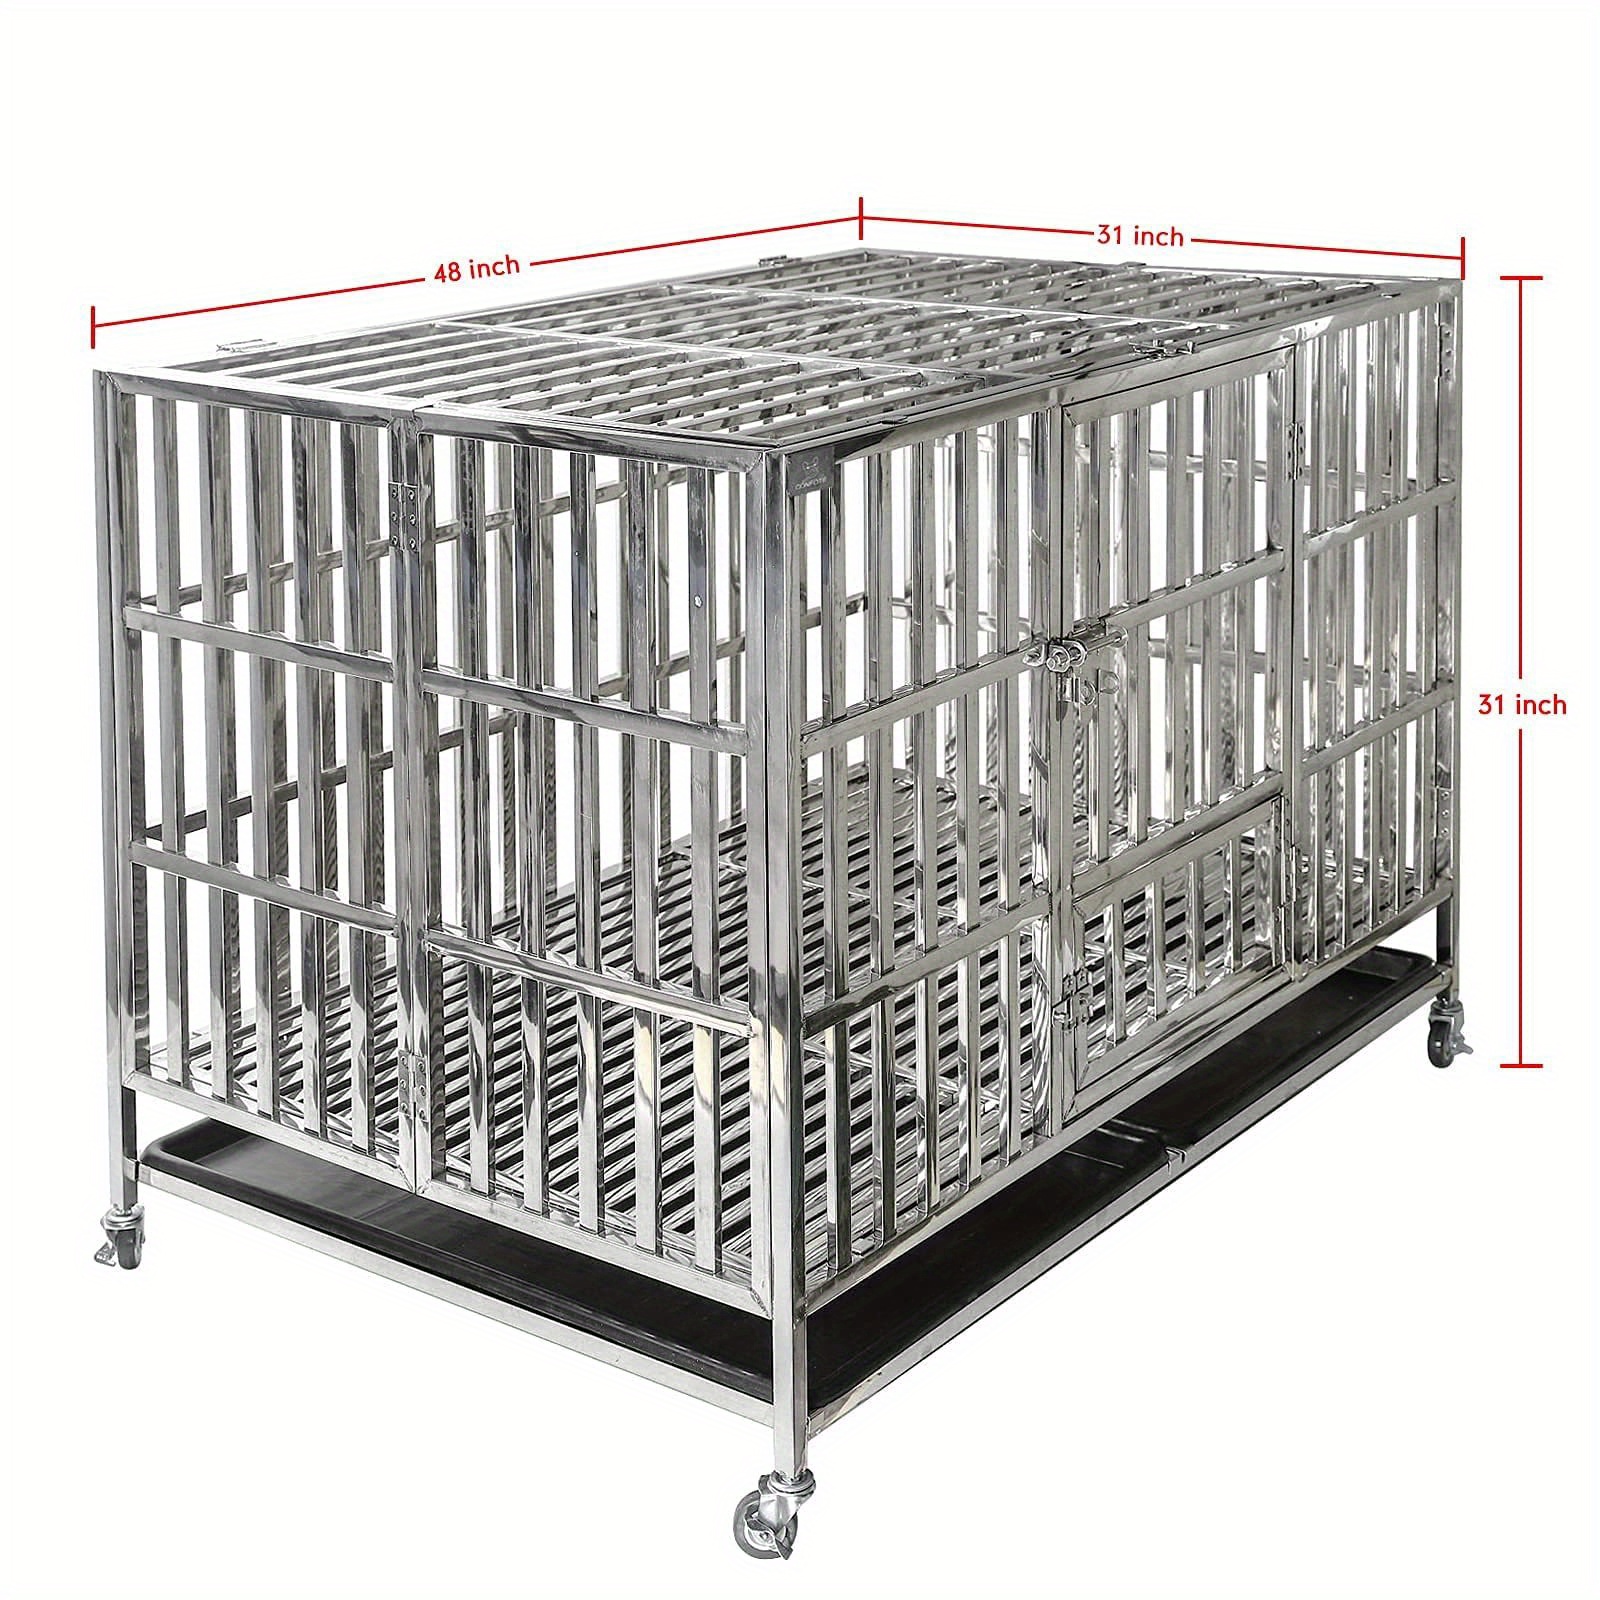 

48" Heavy Duty Stainless Steel Dog Cage Kennel Crate And Playpen For Training Large Dog Indoor Outdoor With Double Doors & Locks Design Included Lockable Wheels Removable Tray No Screw